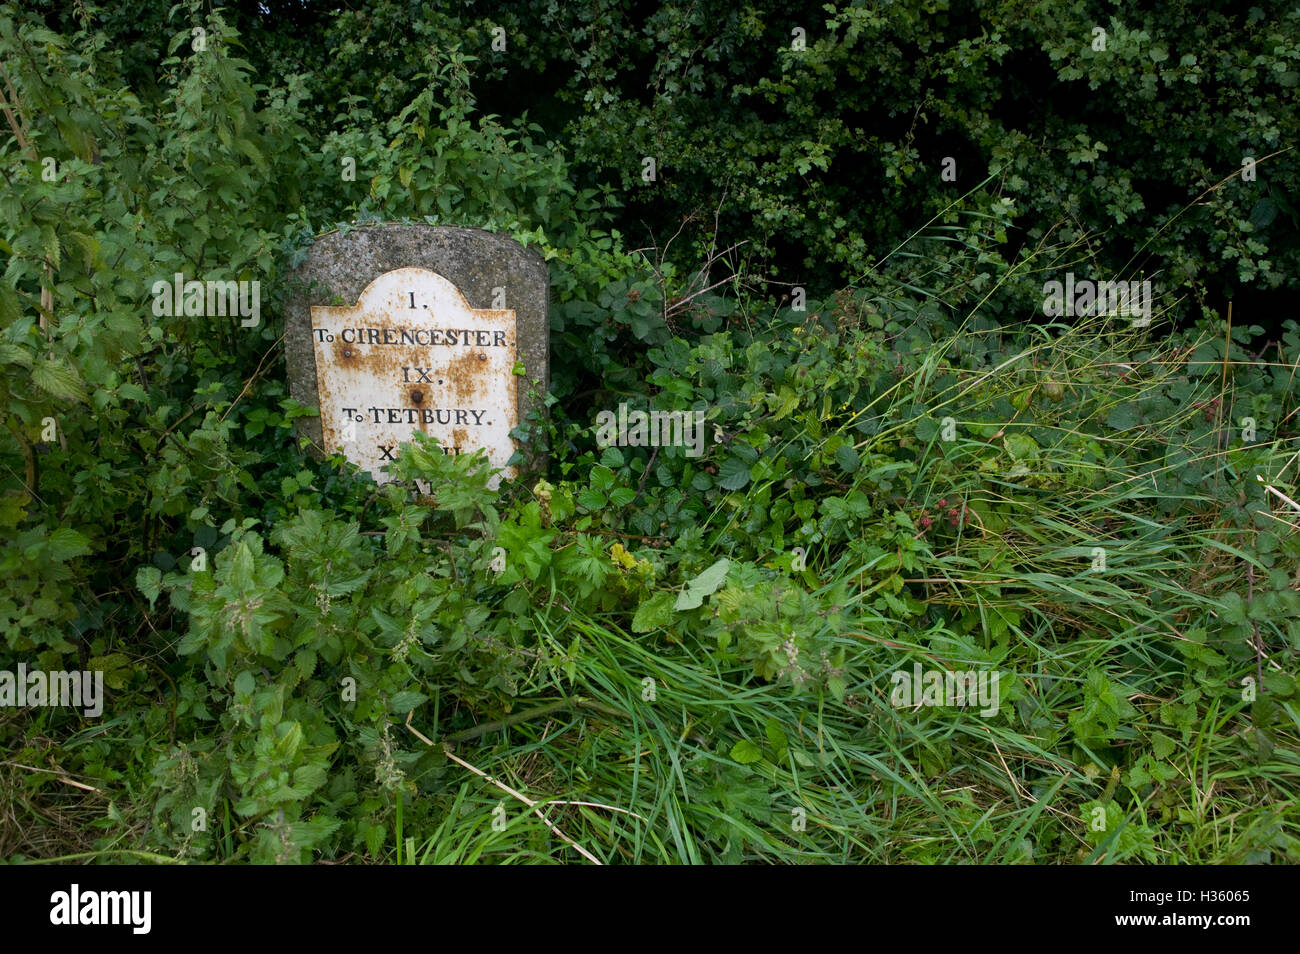 An old mile marker or stone used on road sides to indicate distances to towns and villages. Stock Photo